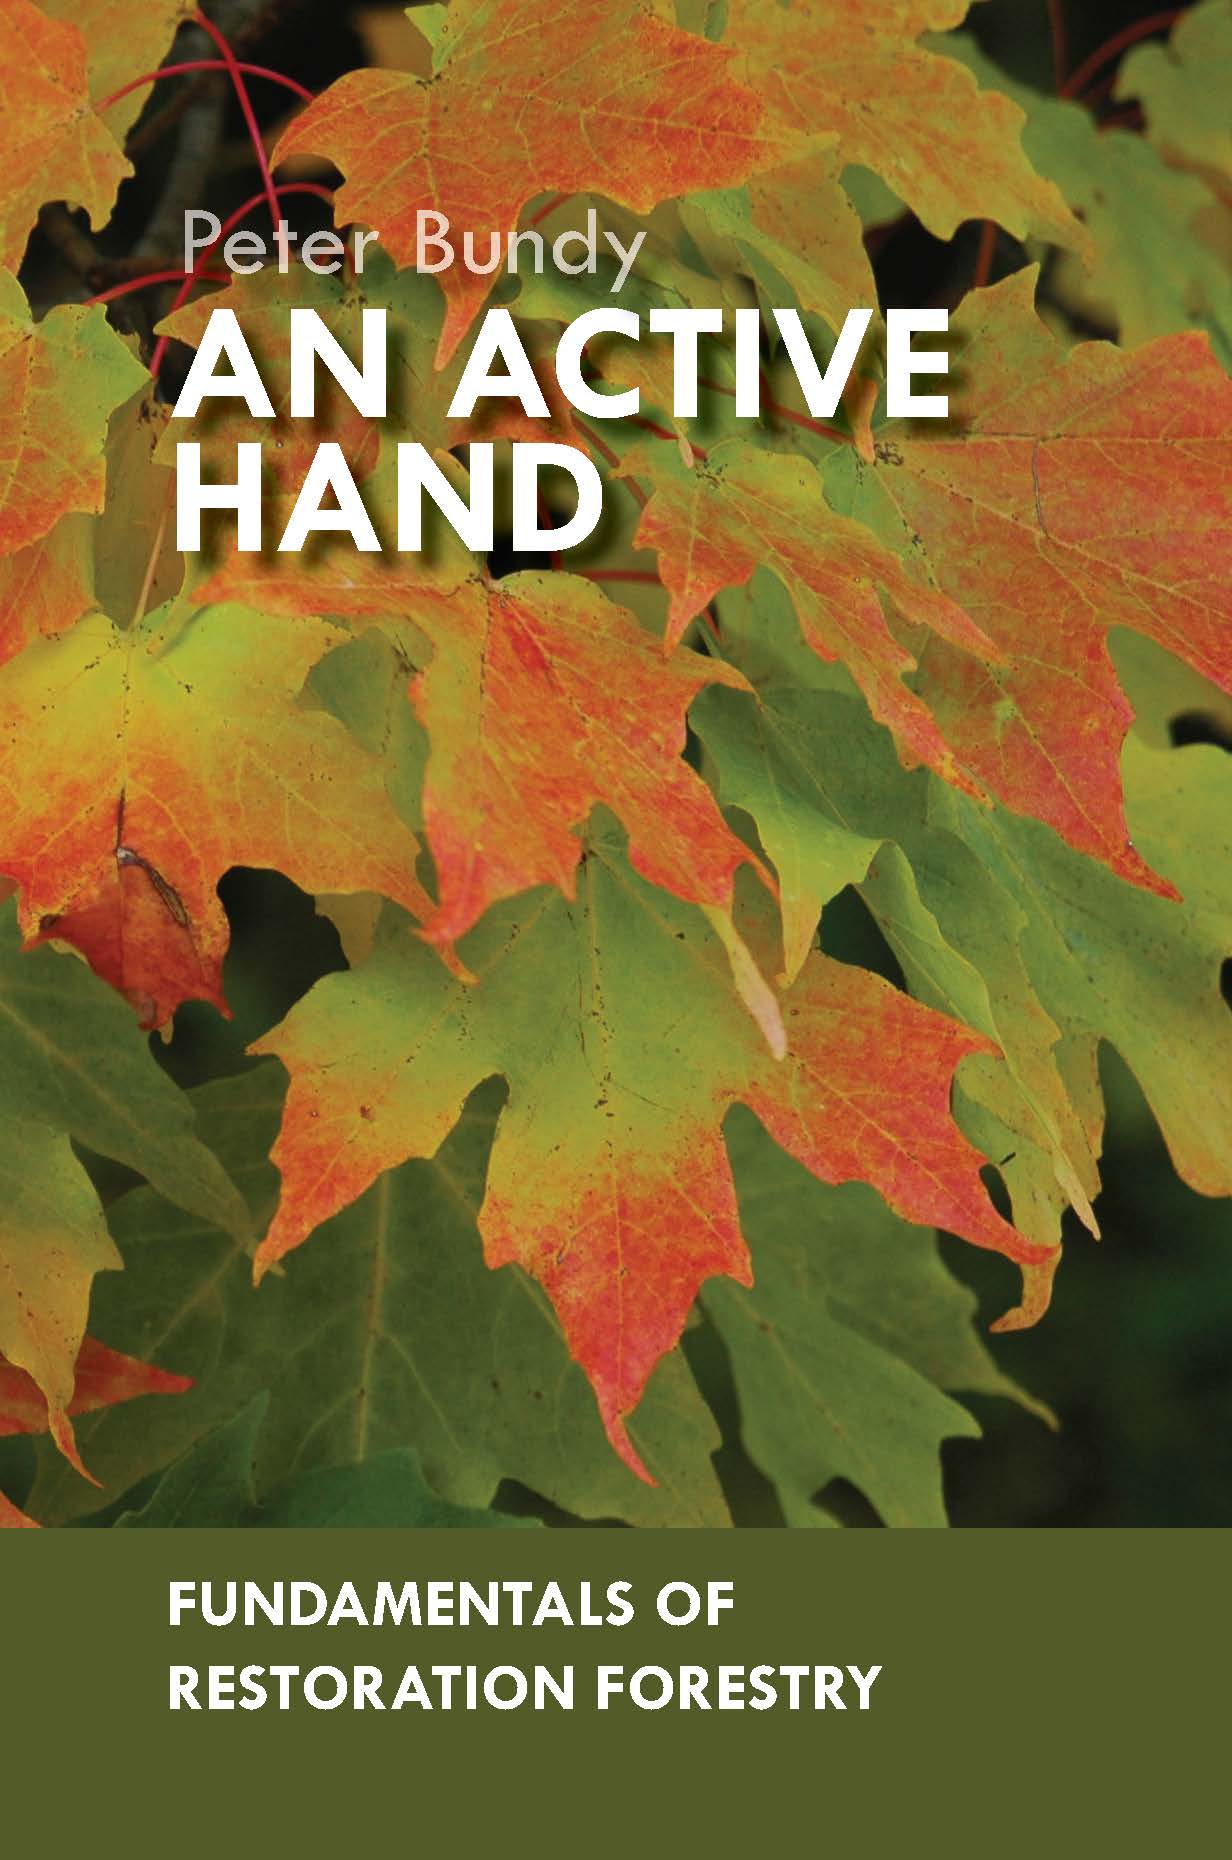 An Active Hand - Fundamentals of Restoration Forestry